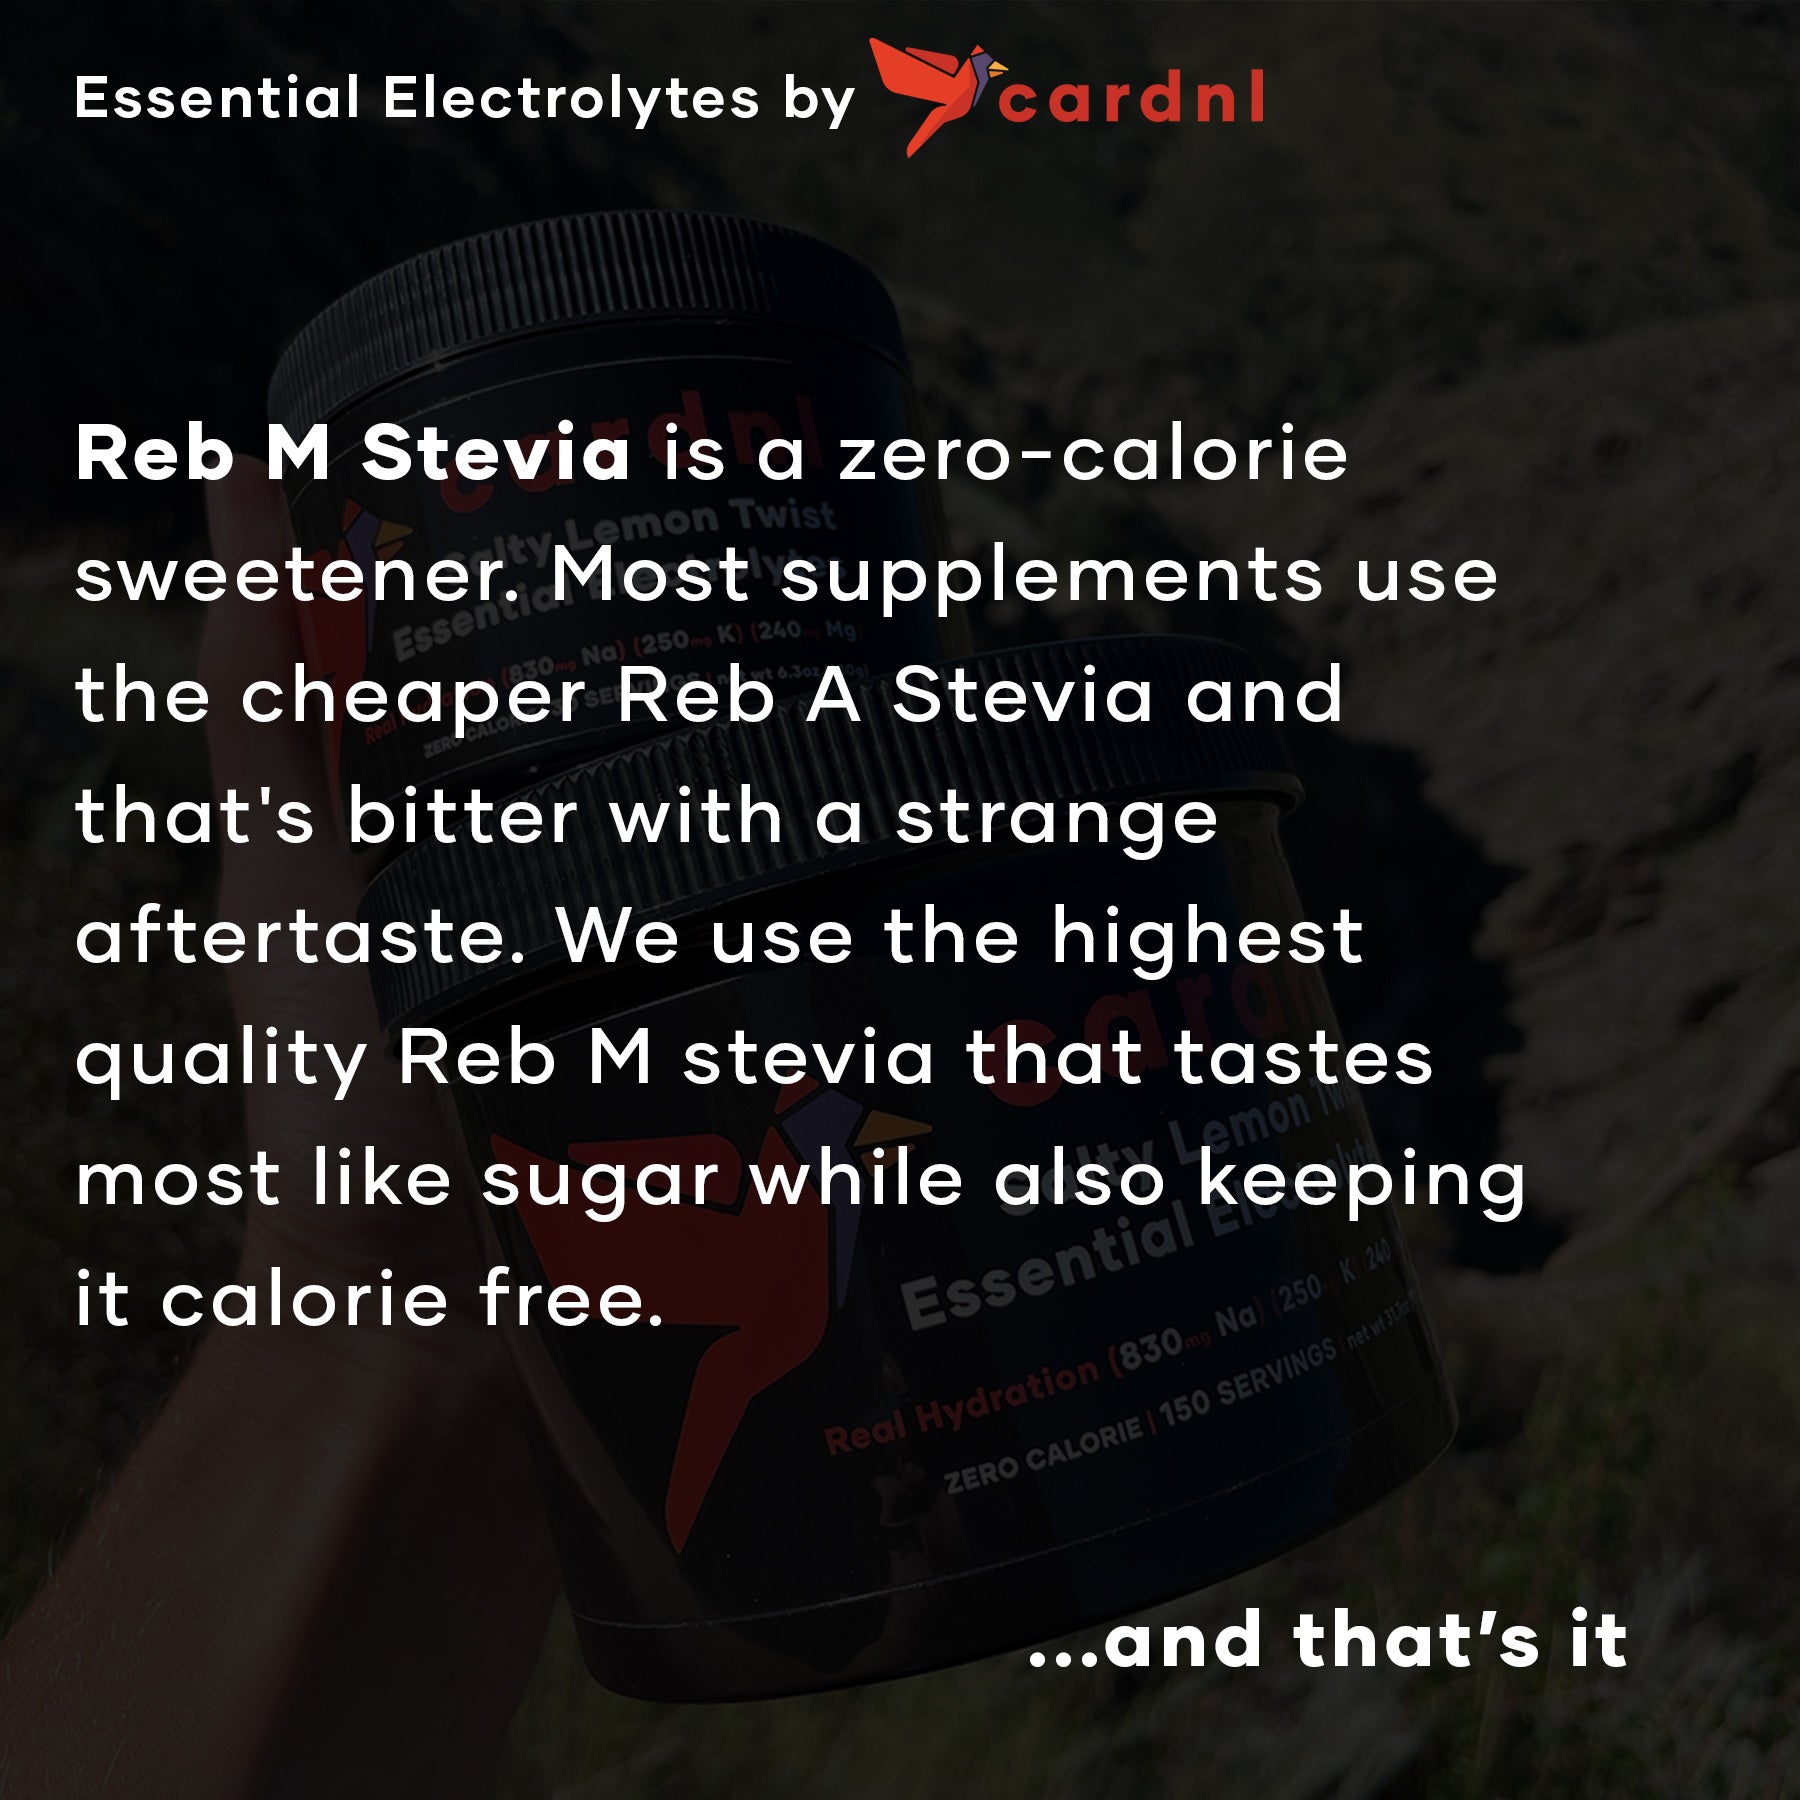 Reb M Steiva is a zero-calorie sweetener. Most supplements use the cheaper Reb A Stevia and that's bitter with a strange aftertaste. We use the highest quality Reb M stevia that tastes most like sugar while also keeping it calorie free.